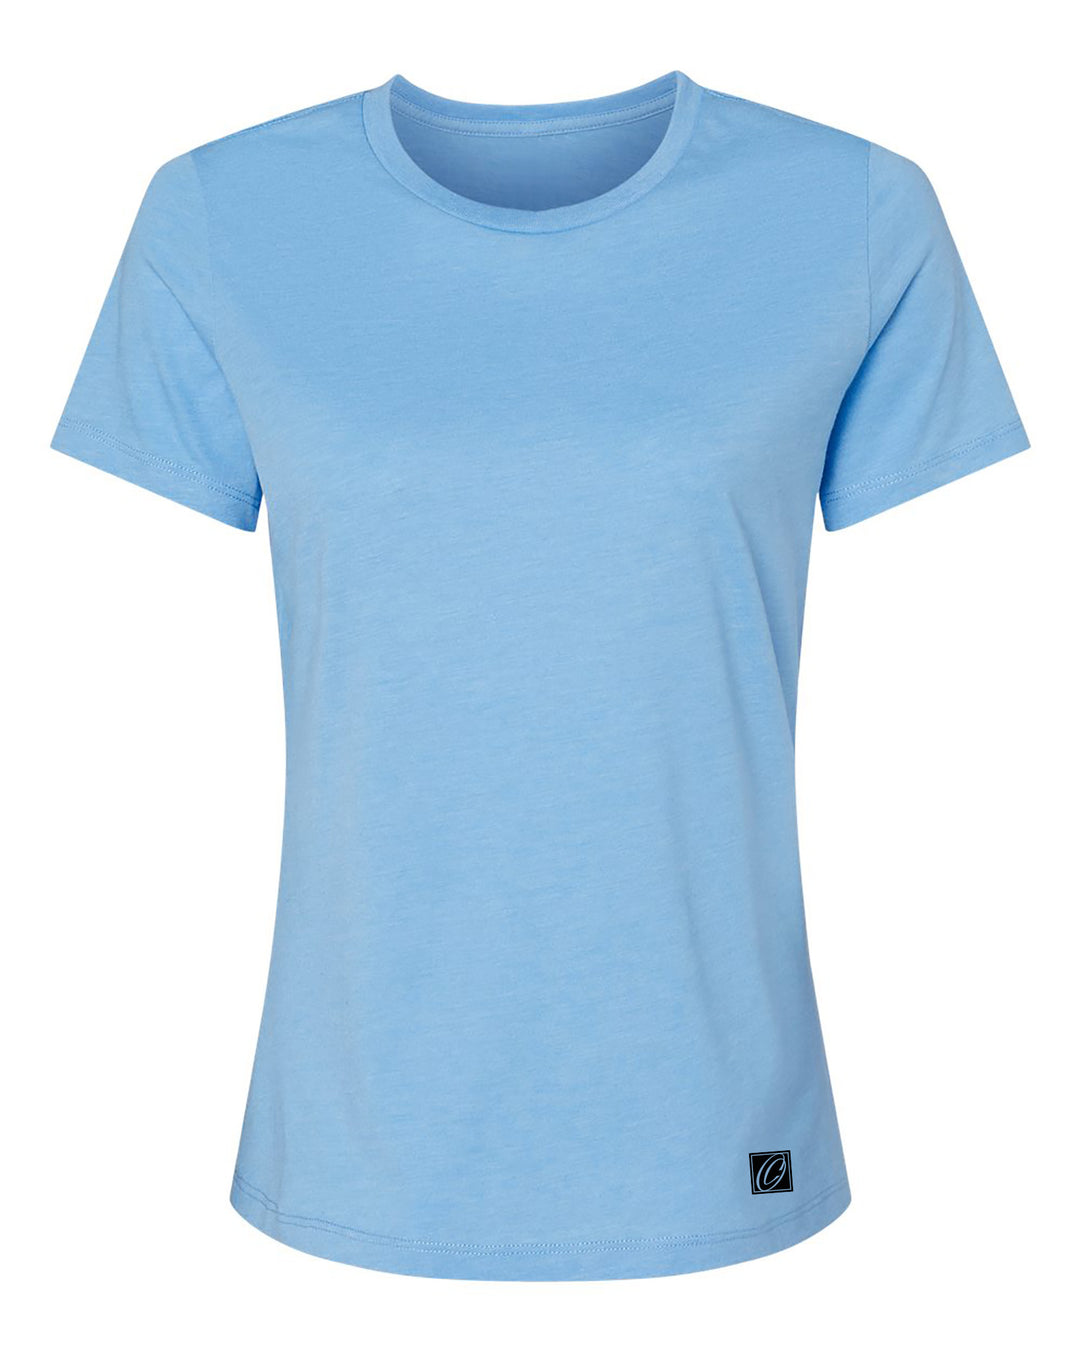 Bella Canvas Ladies Relaxed Fit Heather CVC Crew Neck Short Sleeve Tee - Black/Gray/White/Blue/Green